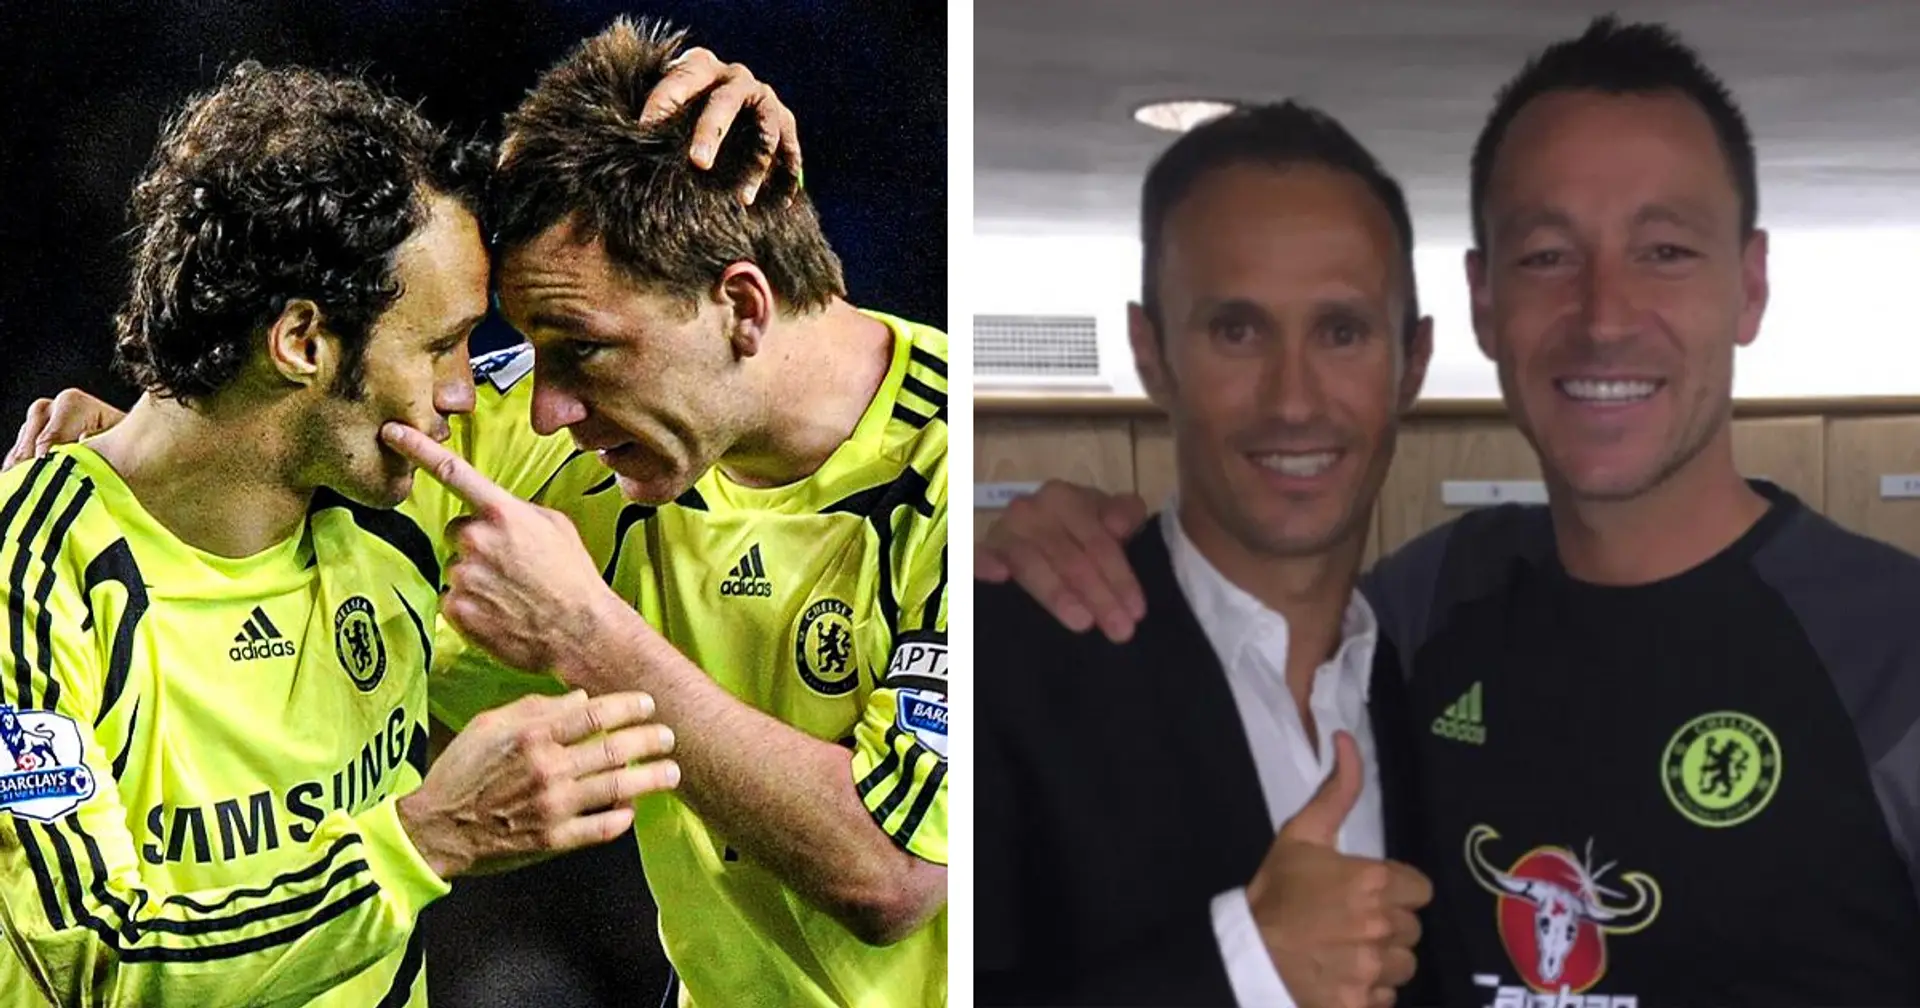 'Our connection was something else': Ricardo Carvalho opens up on John Terry partnership